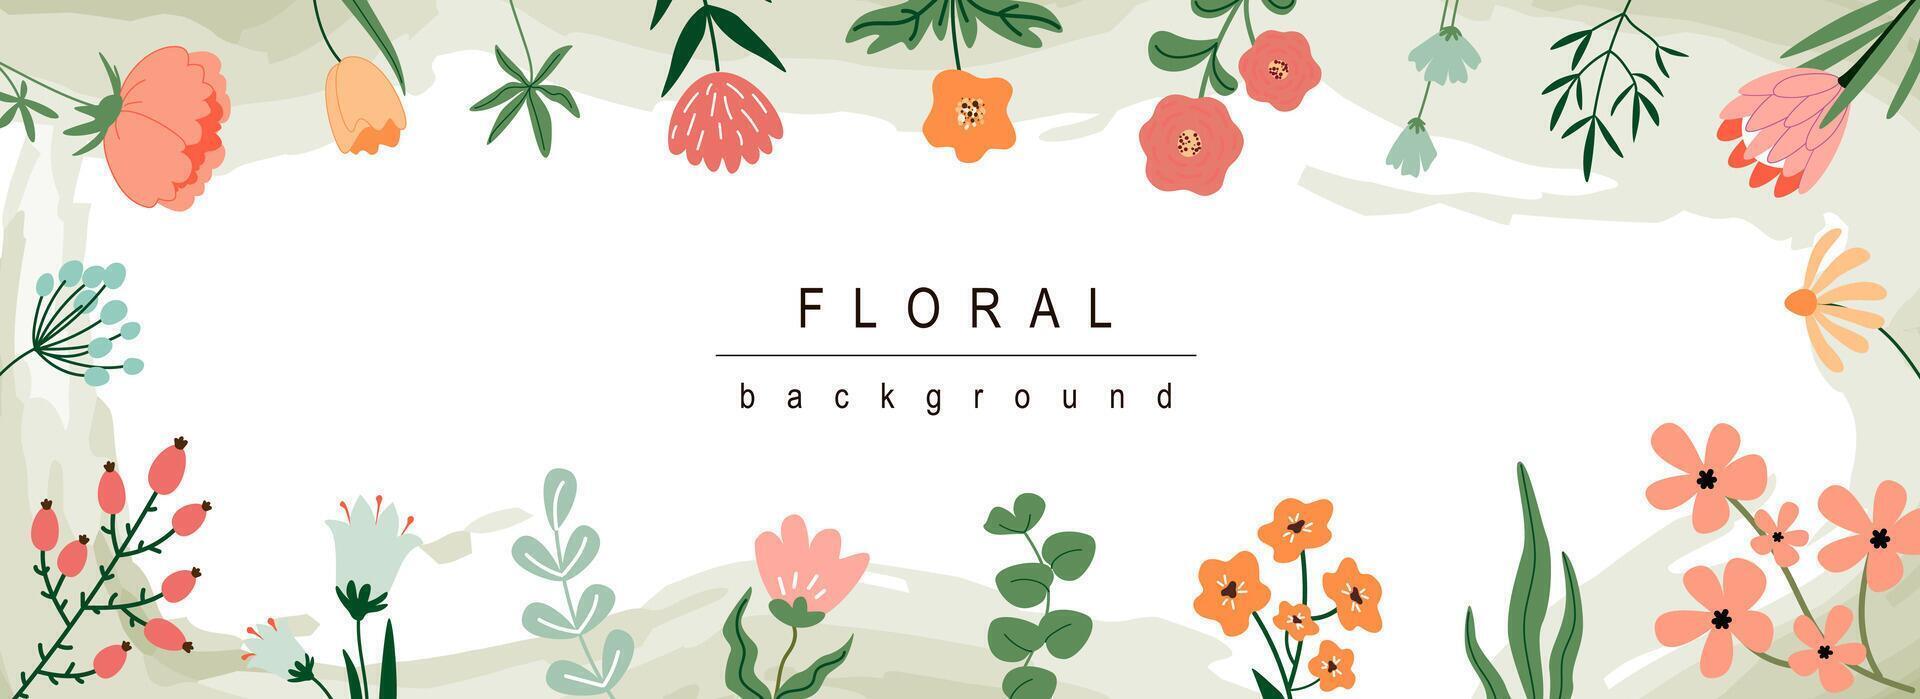 Floral horizontal web banner. Abstract summer blooming wildflowers and flowers, twigs with leaves borders on white background. Vector illustration for header website, cover templates in modern design